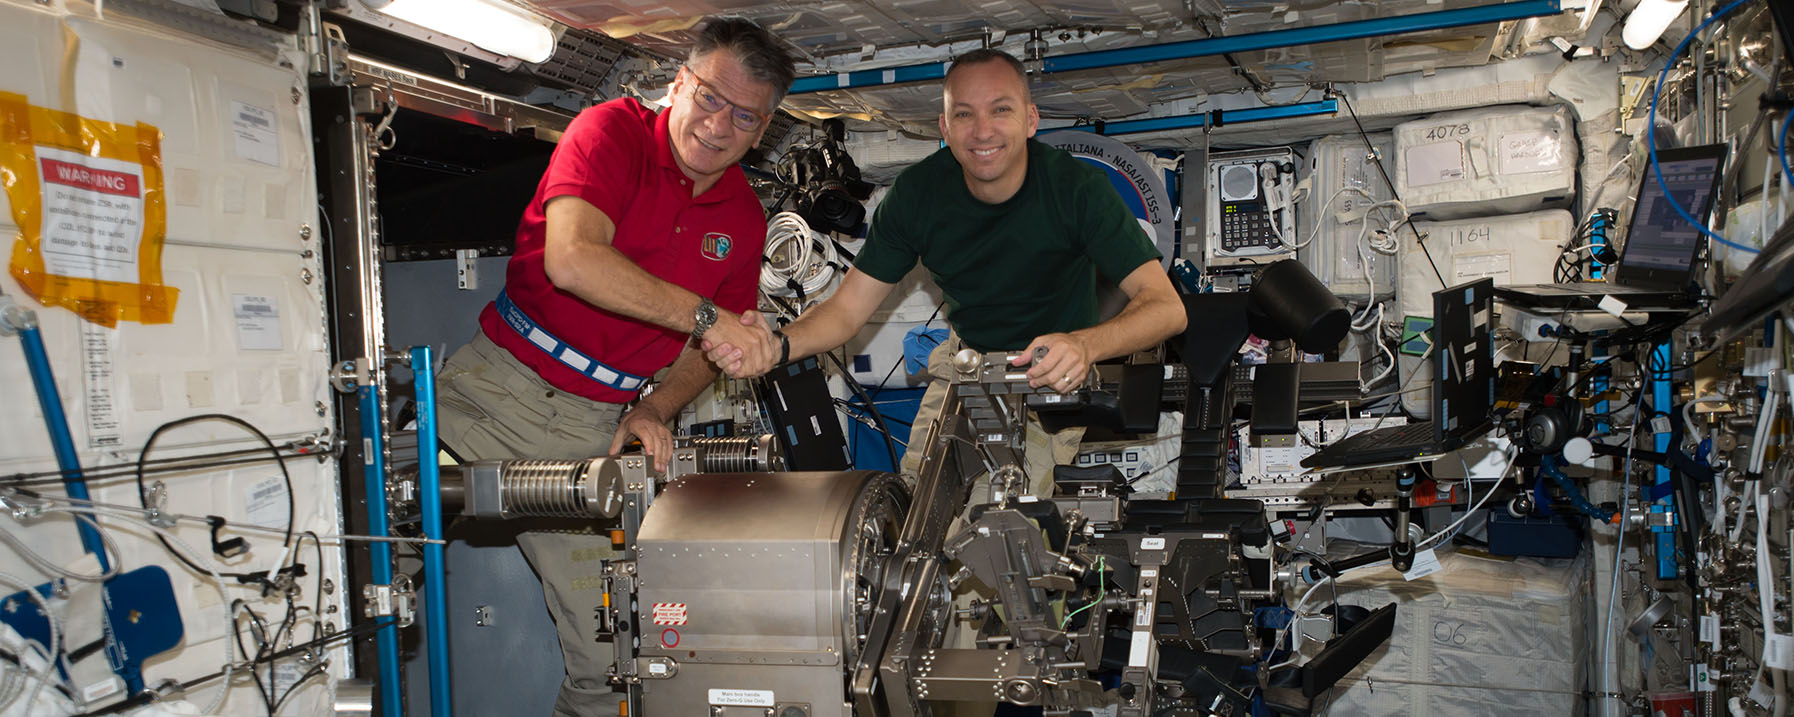 Two Crew Members Aboard the International Space Station